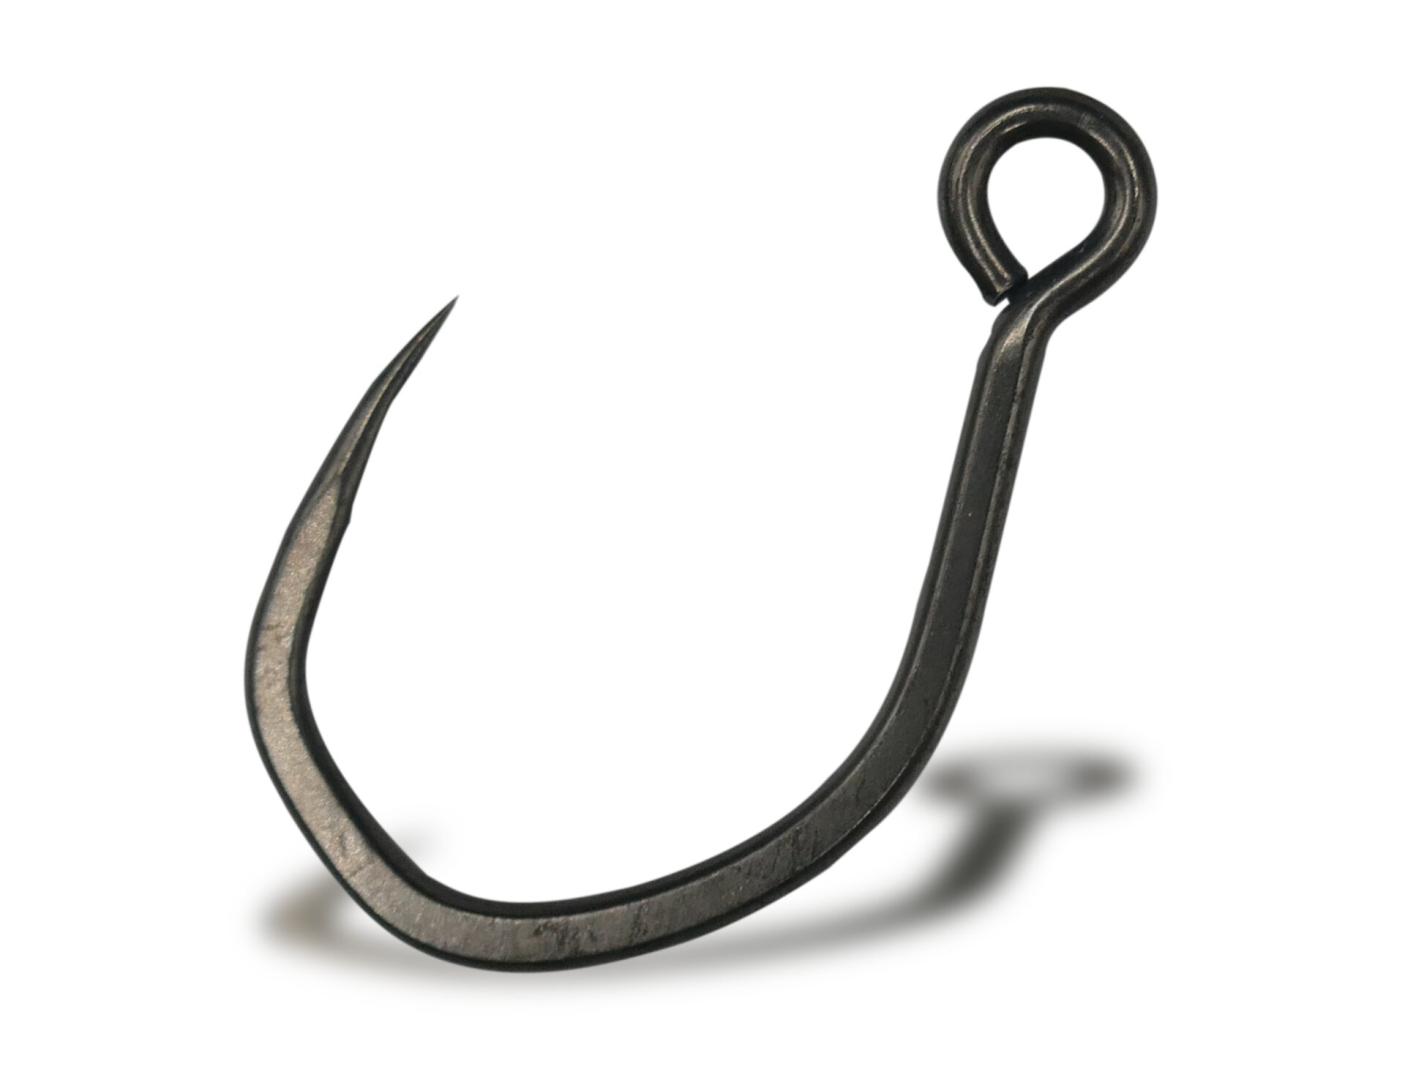 VMC 9171 BN Swash Open Eye Hook for Inline Replacement, Lure or